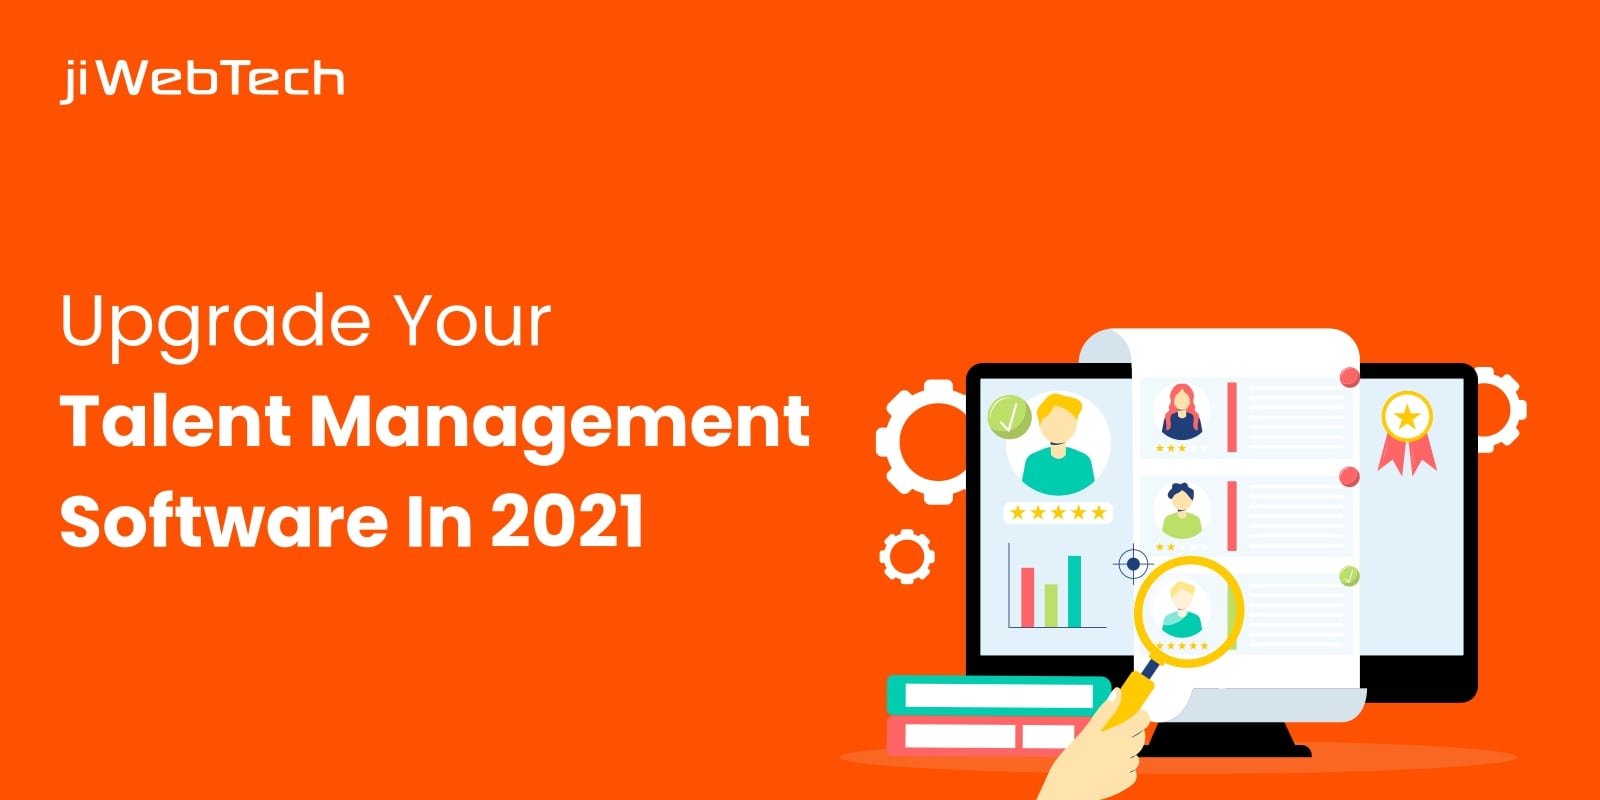 Why is it vital to upgrade your Talent Management System in 2021?